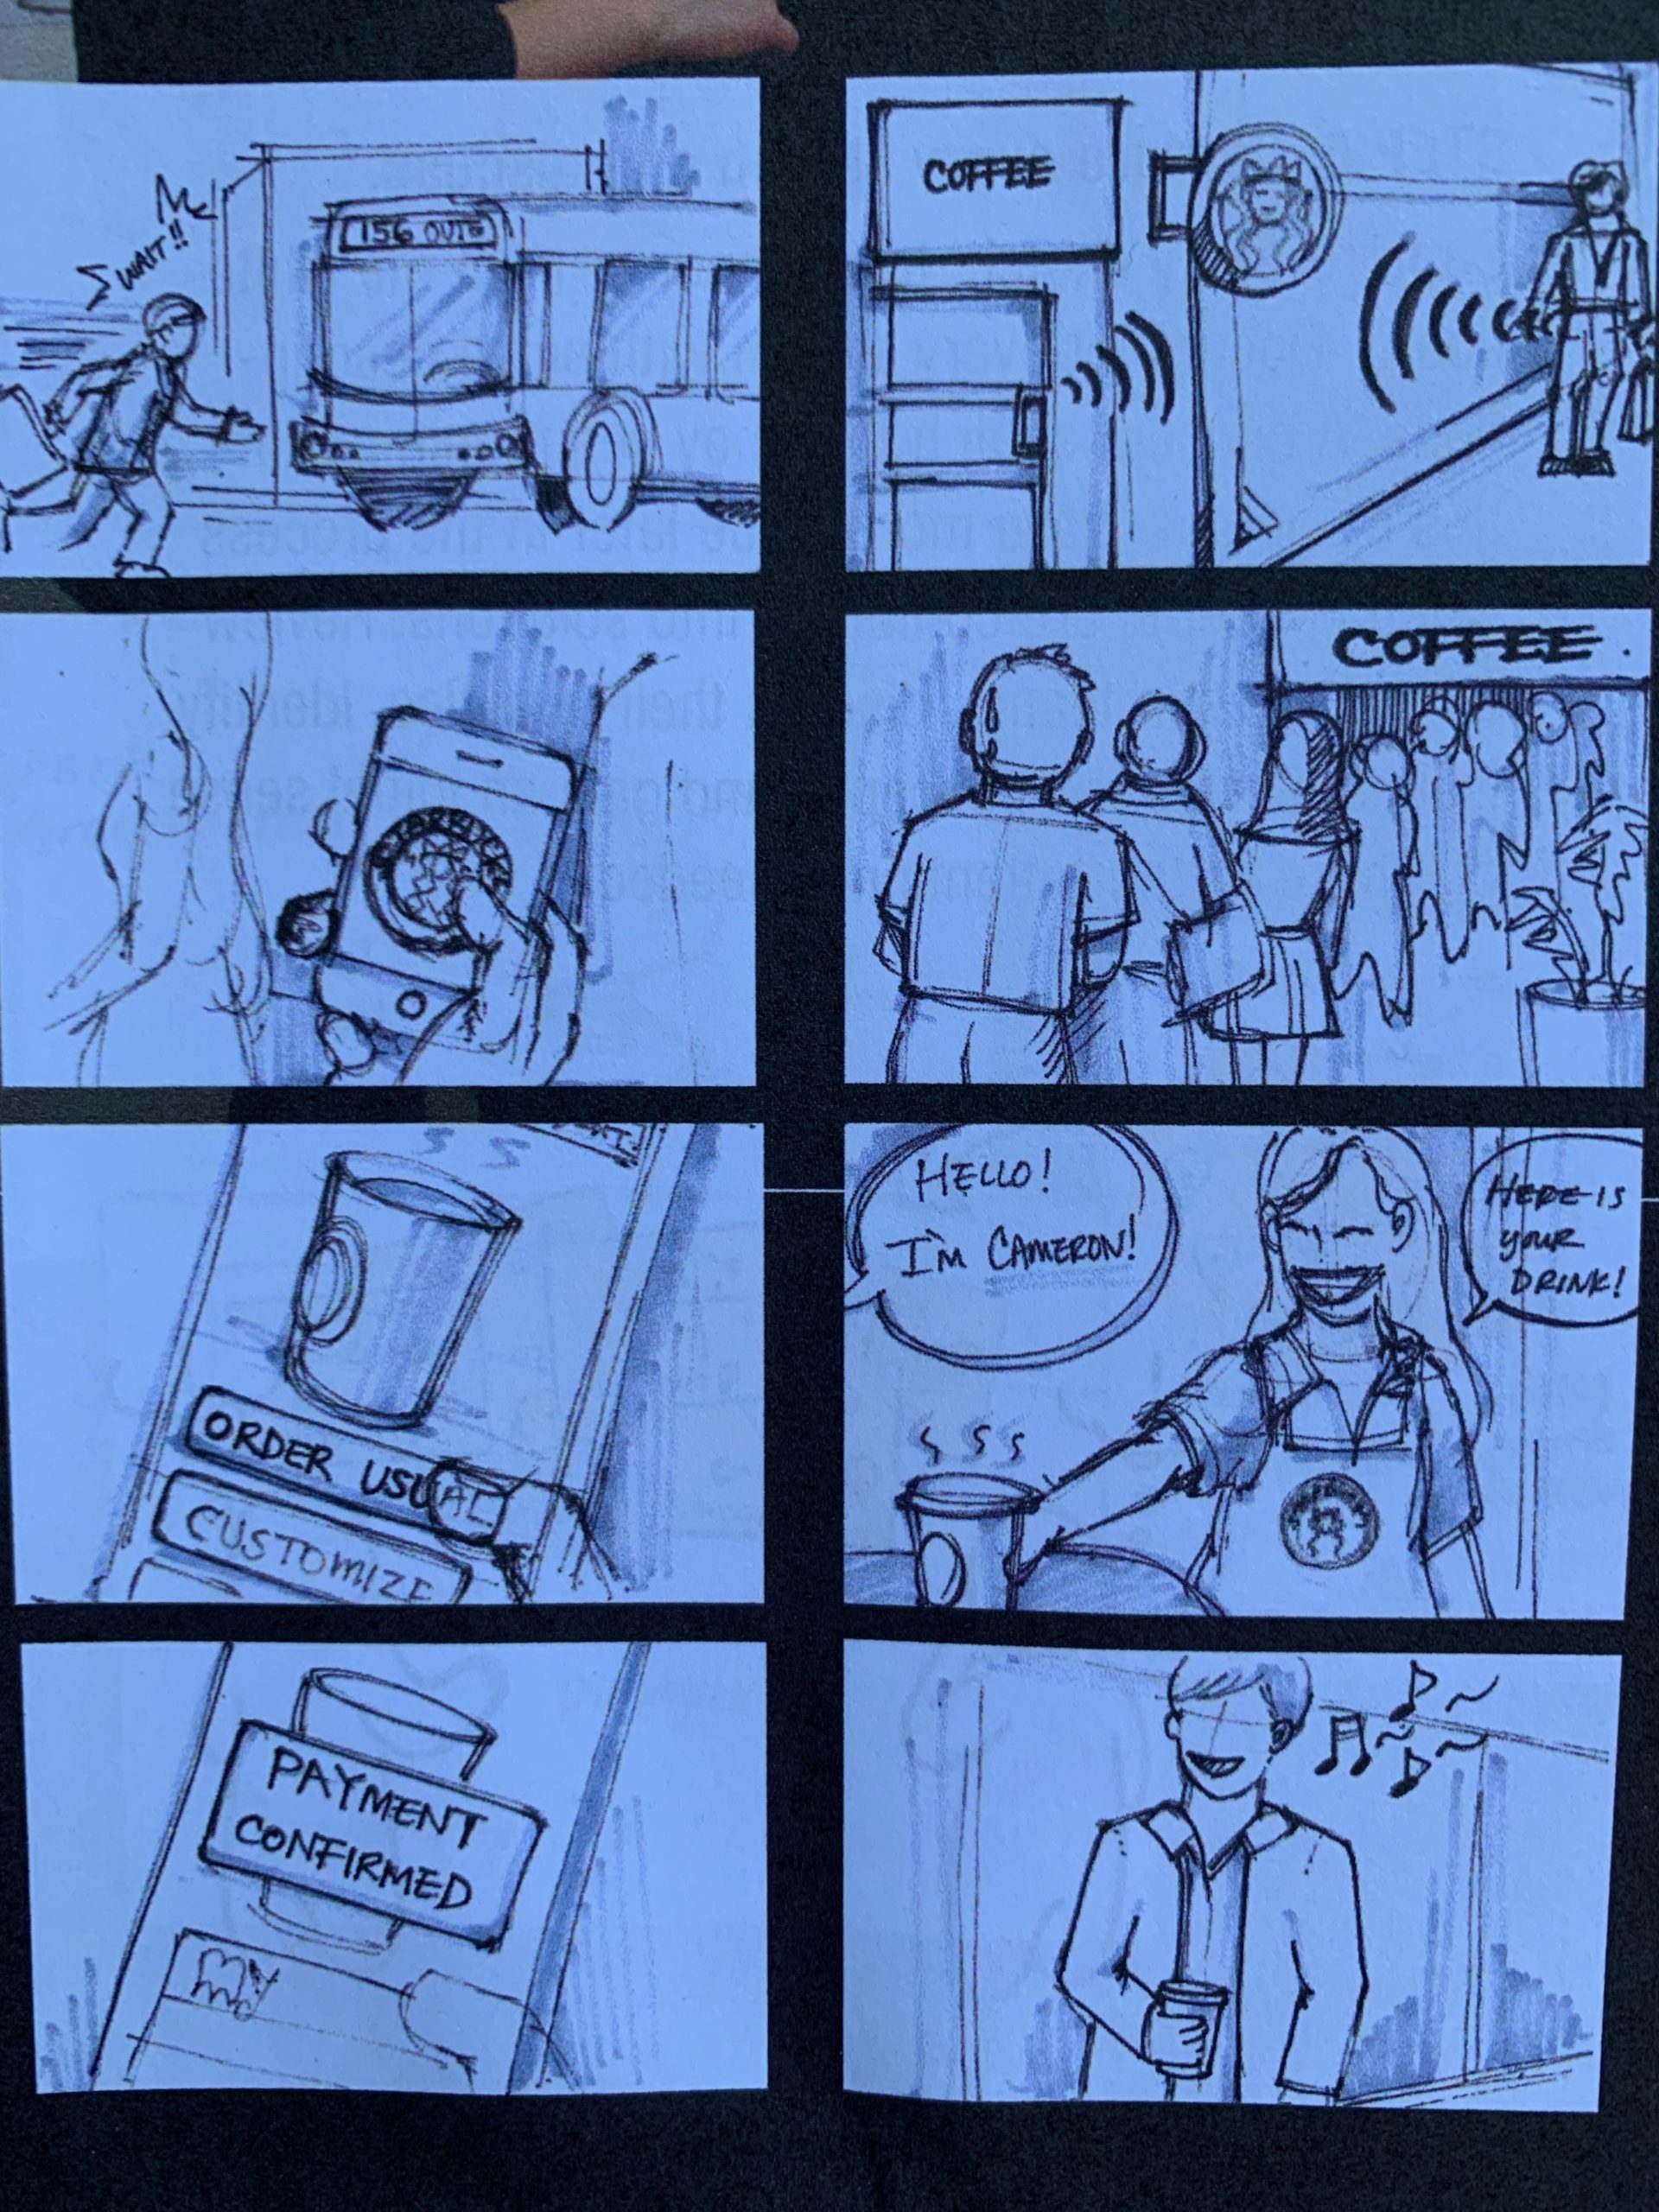 The Art of Storyboarding